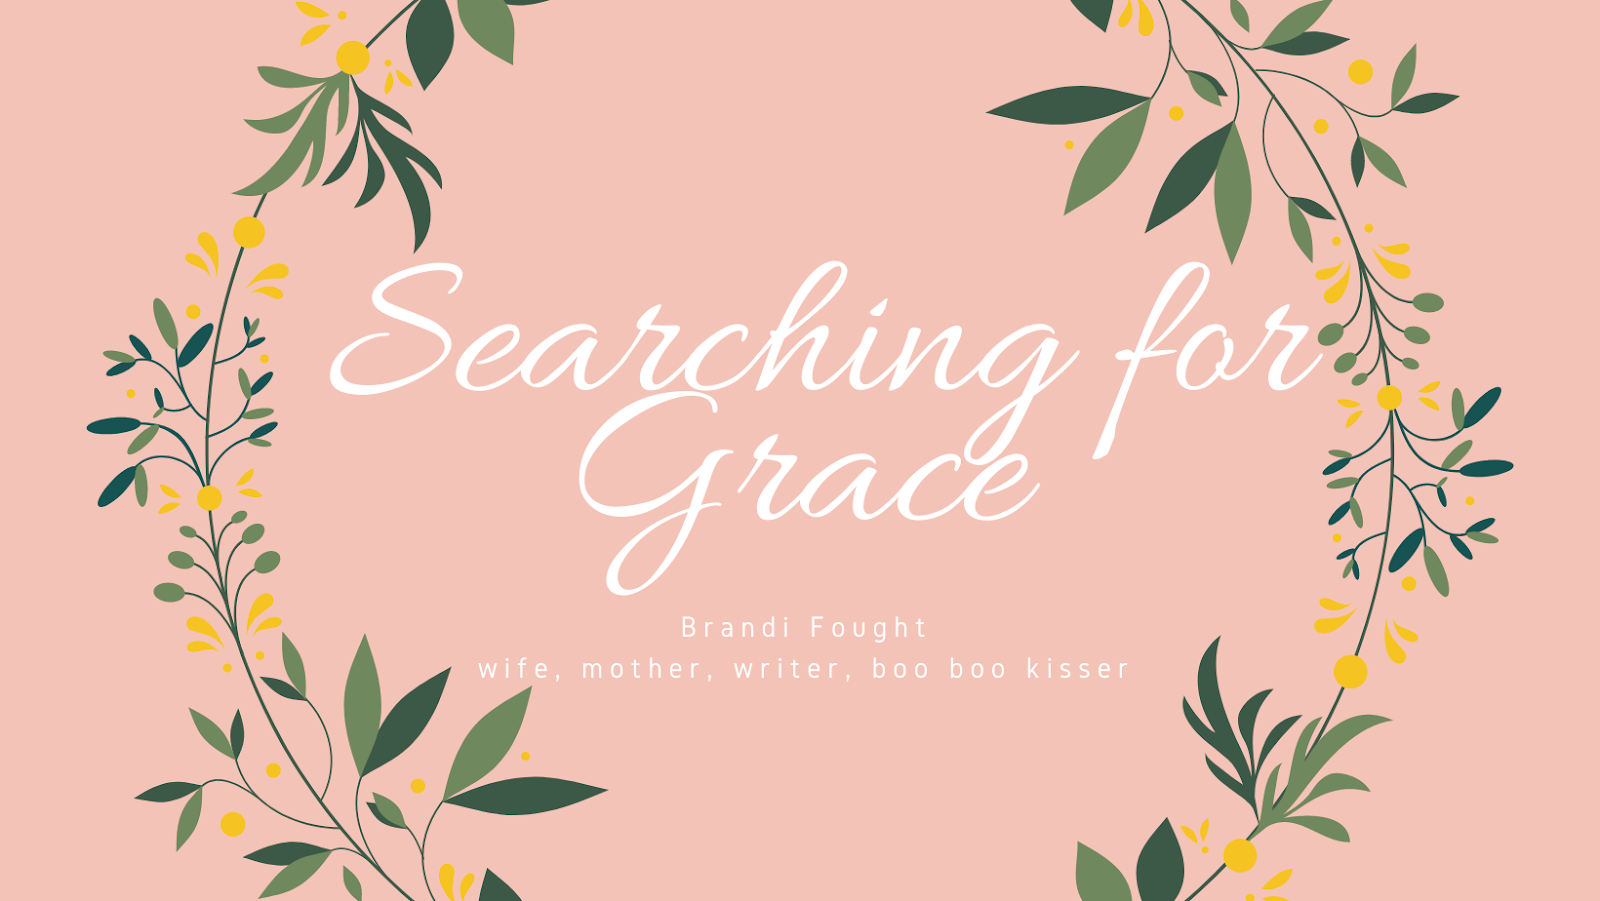 Searching for Grace 